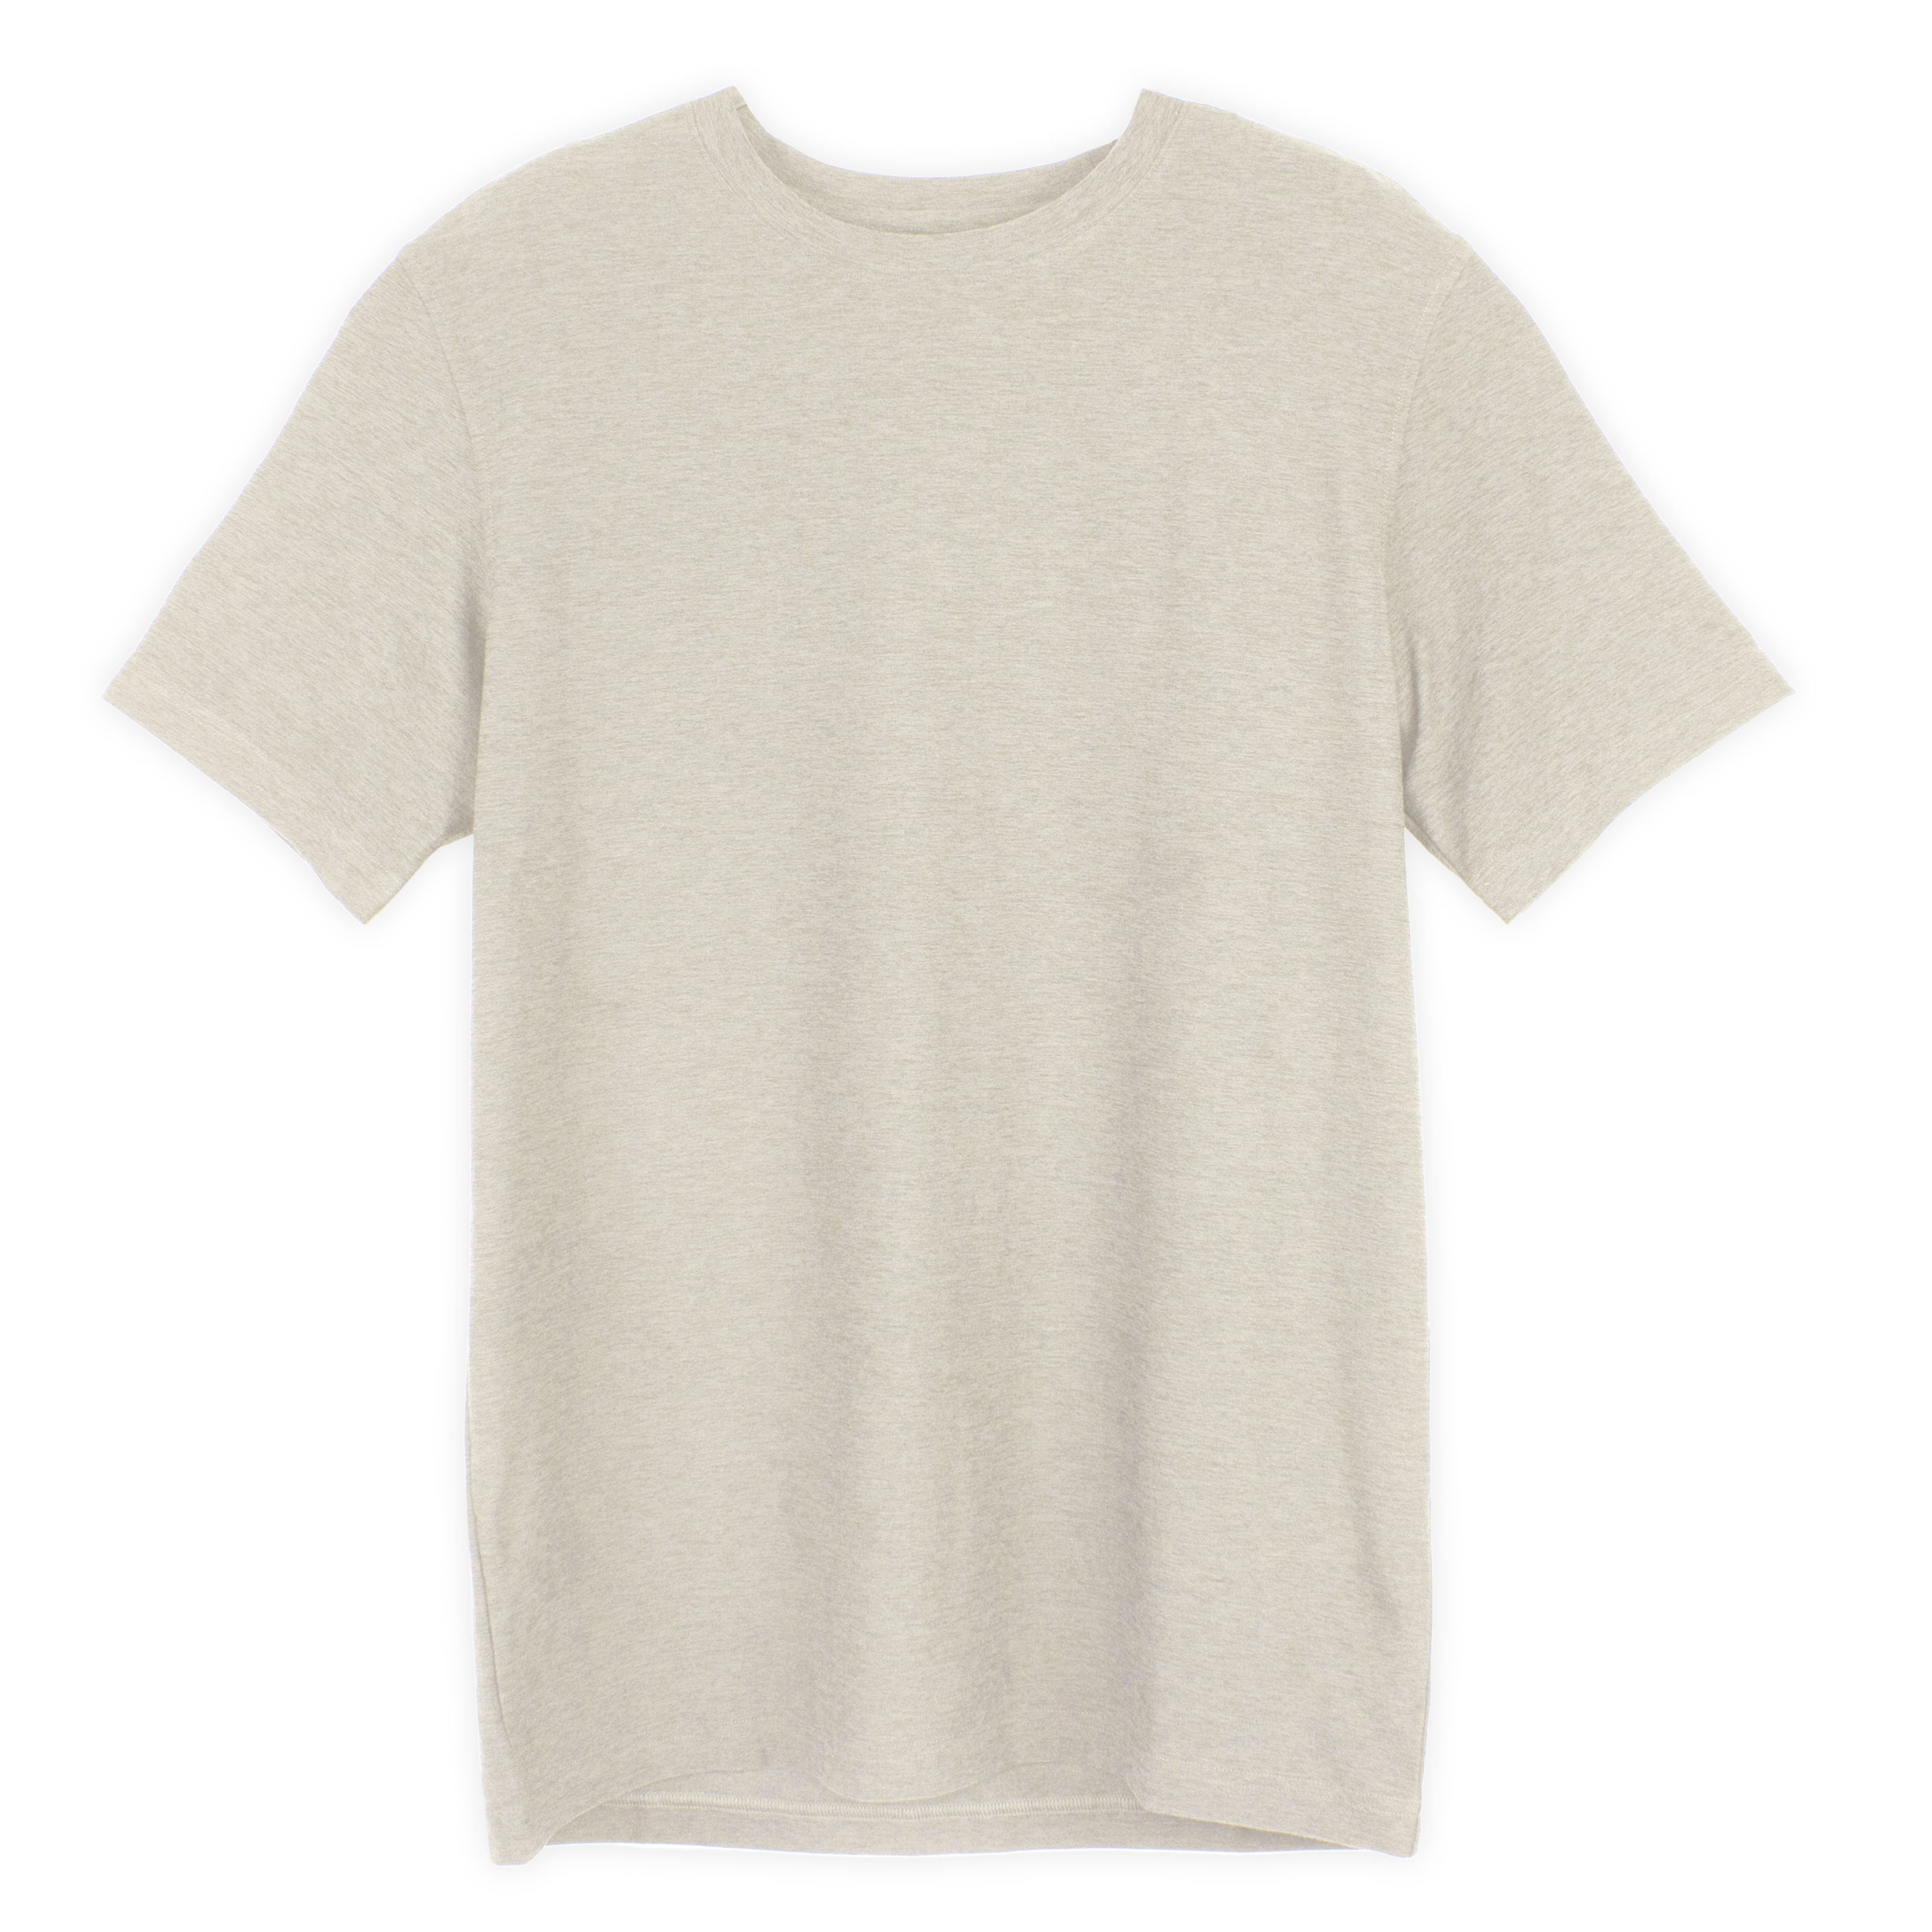 Short Sleeve Tech Tee in Stone front with a crew neck and heathered color